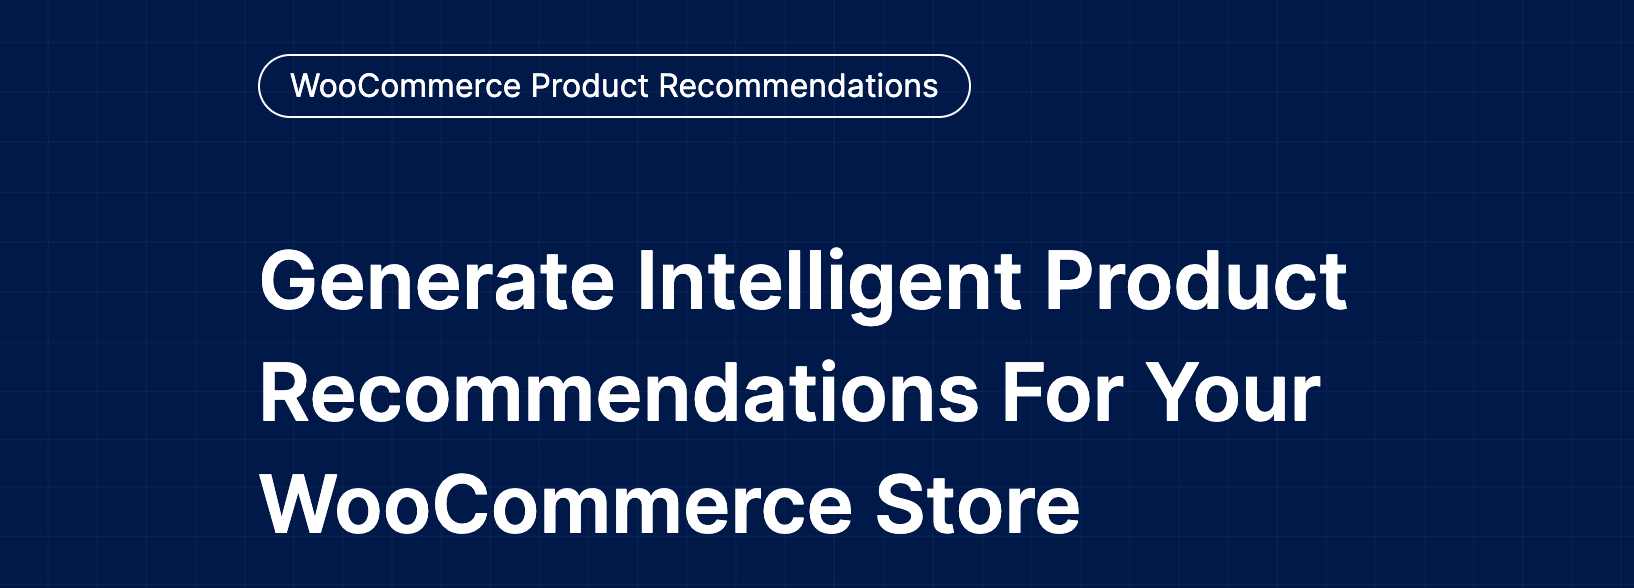 WooCommerce Product Recommendations - Top 20+ Best Plugins to Increase Sales in WooCommerce – HostNamaste.com